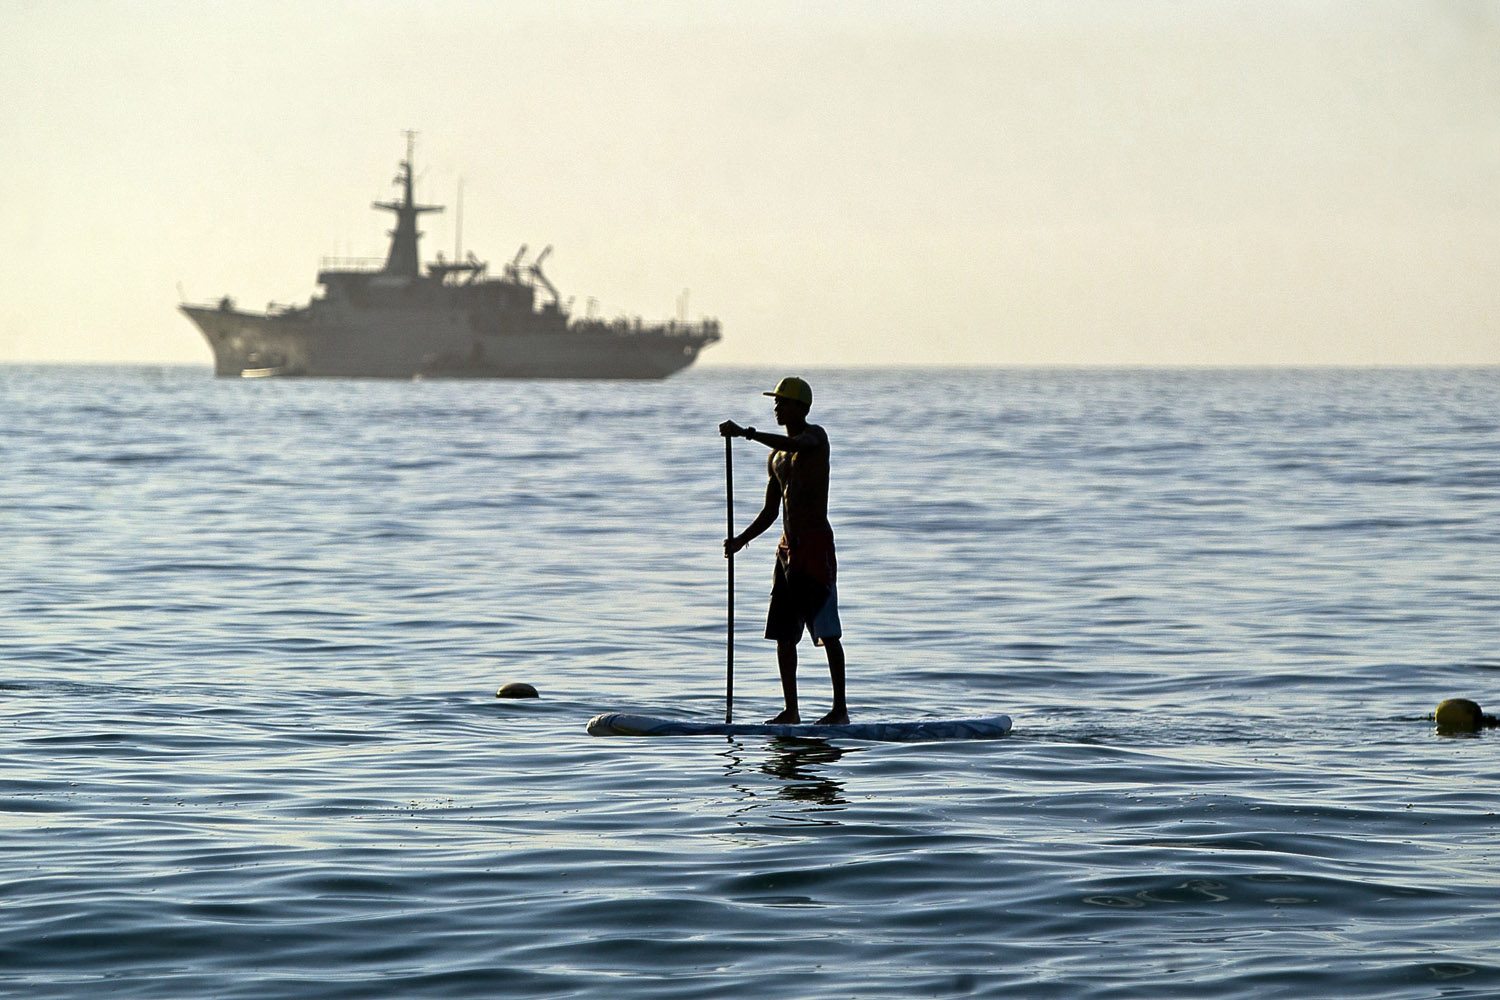 A man stand-up paddle surfs as a Mexican navy ship patrols the bay waters in San Jose del Cabo